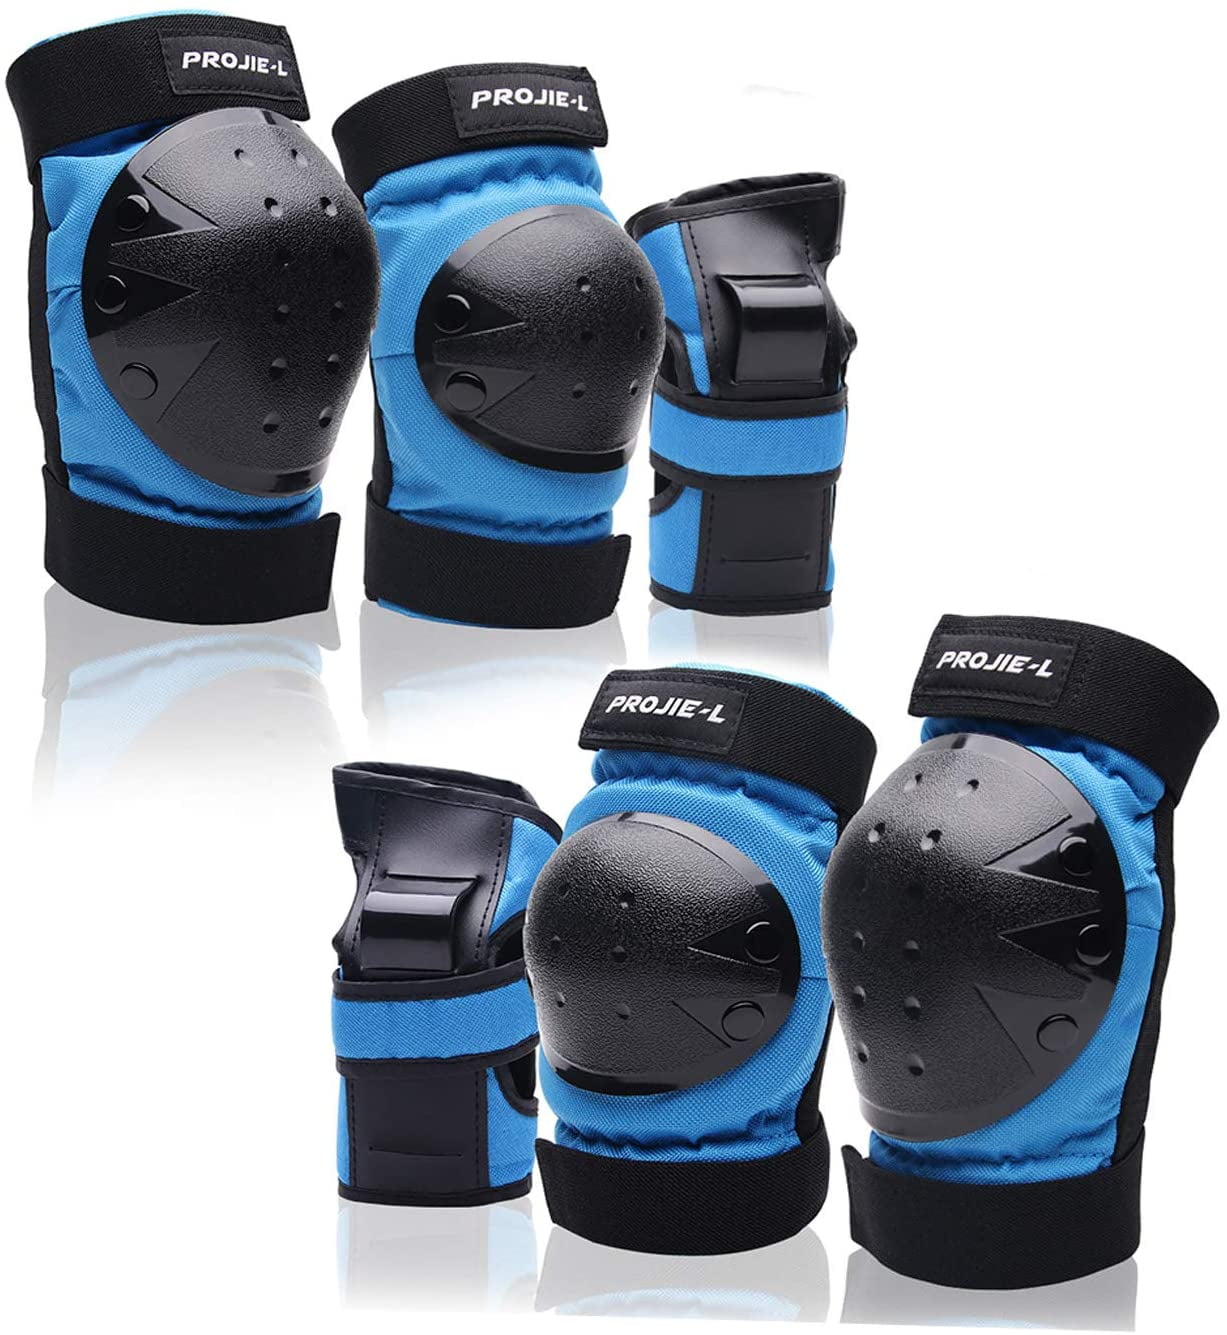 Knee Pads Elbow Pads Wrist Guards Protective Gear Set for Youth/Teens for Skateboarding Rollerblading Roller Skating Cycling Bike BMX Bicycle Scootering 6pcs